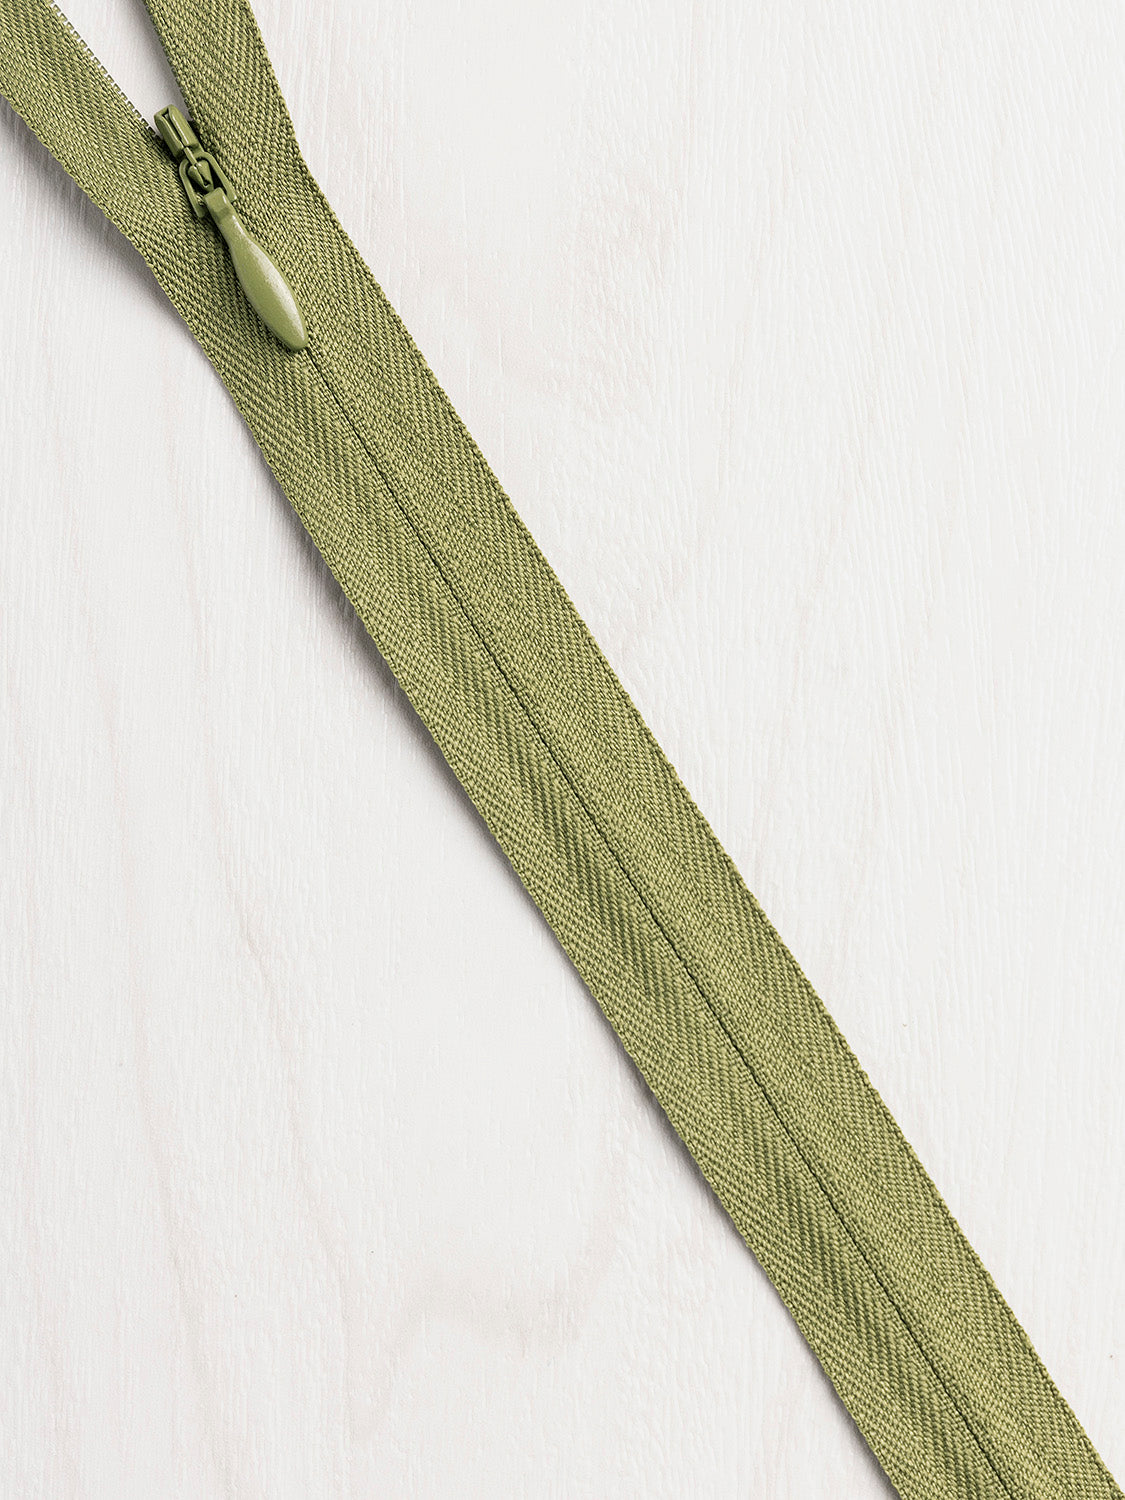 What Are YKK Zippers?